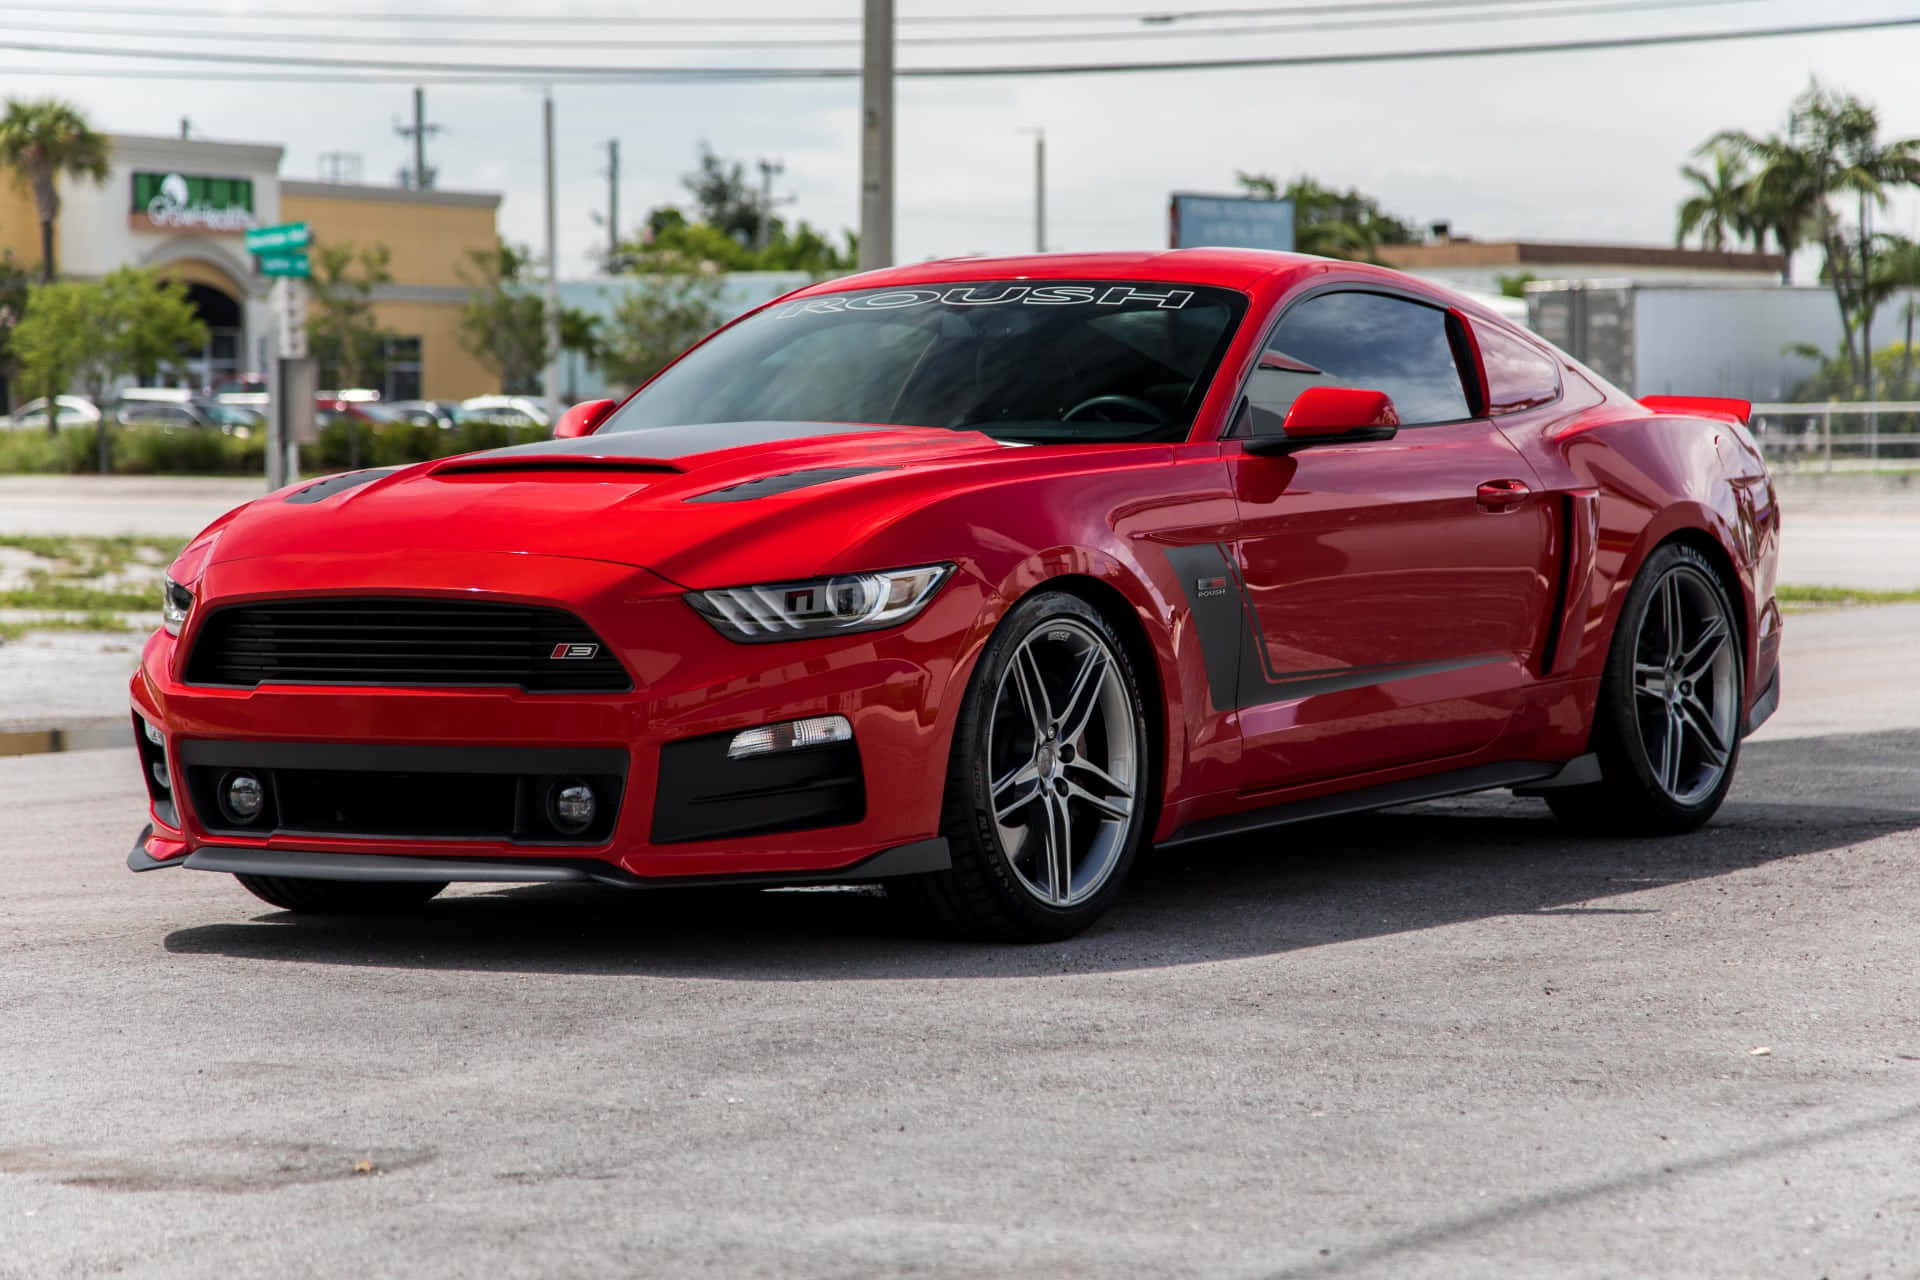 Brighten Up Your Day With a Ford Mustang